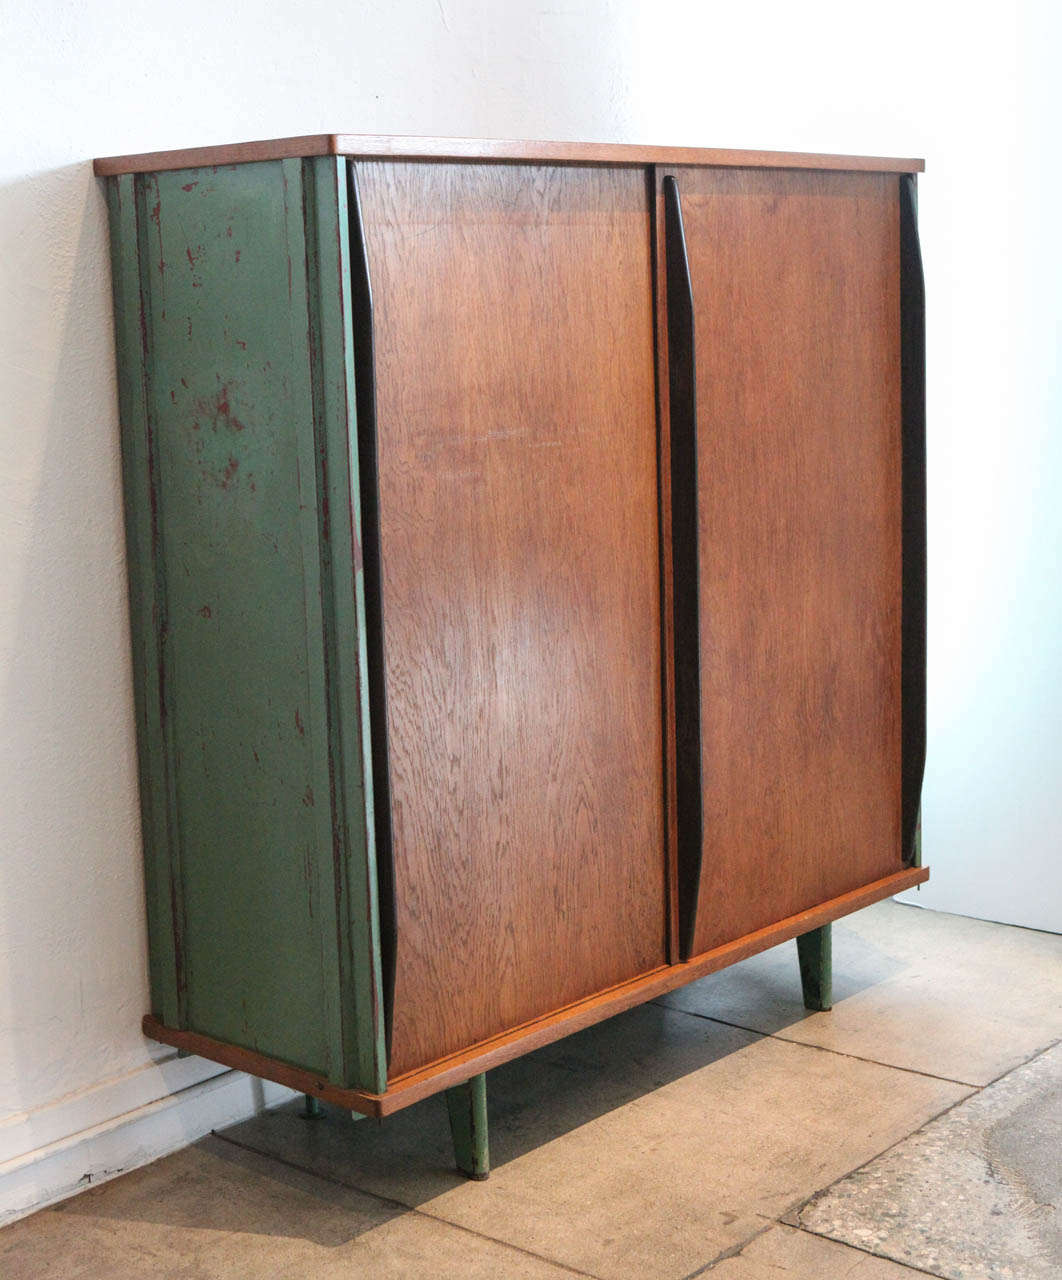 jean prouve's armoire in original condition. sliding doors reveal a hanging rack and 4 adjustable shelves.